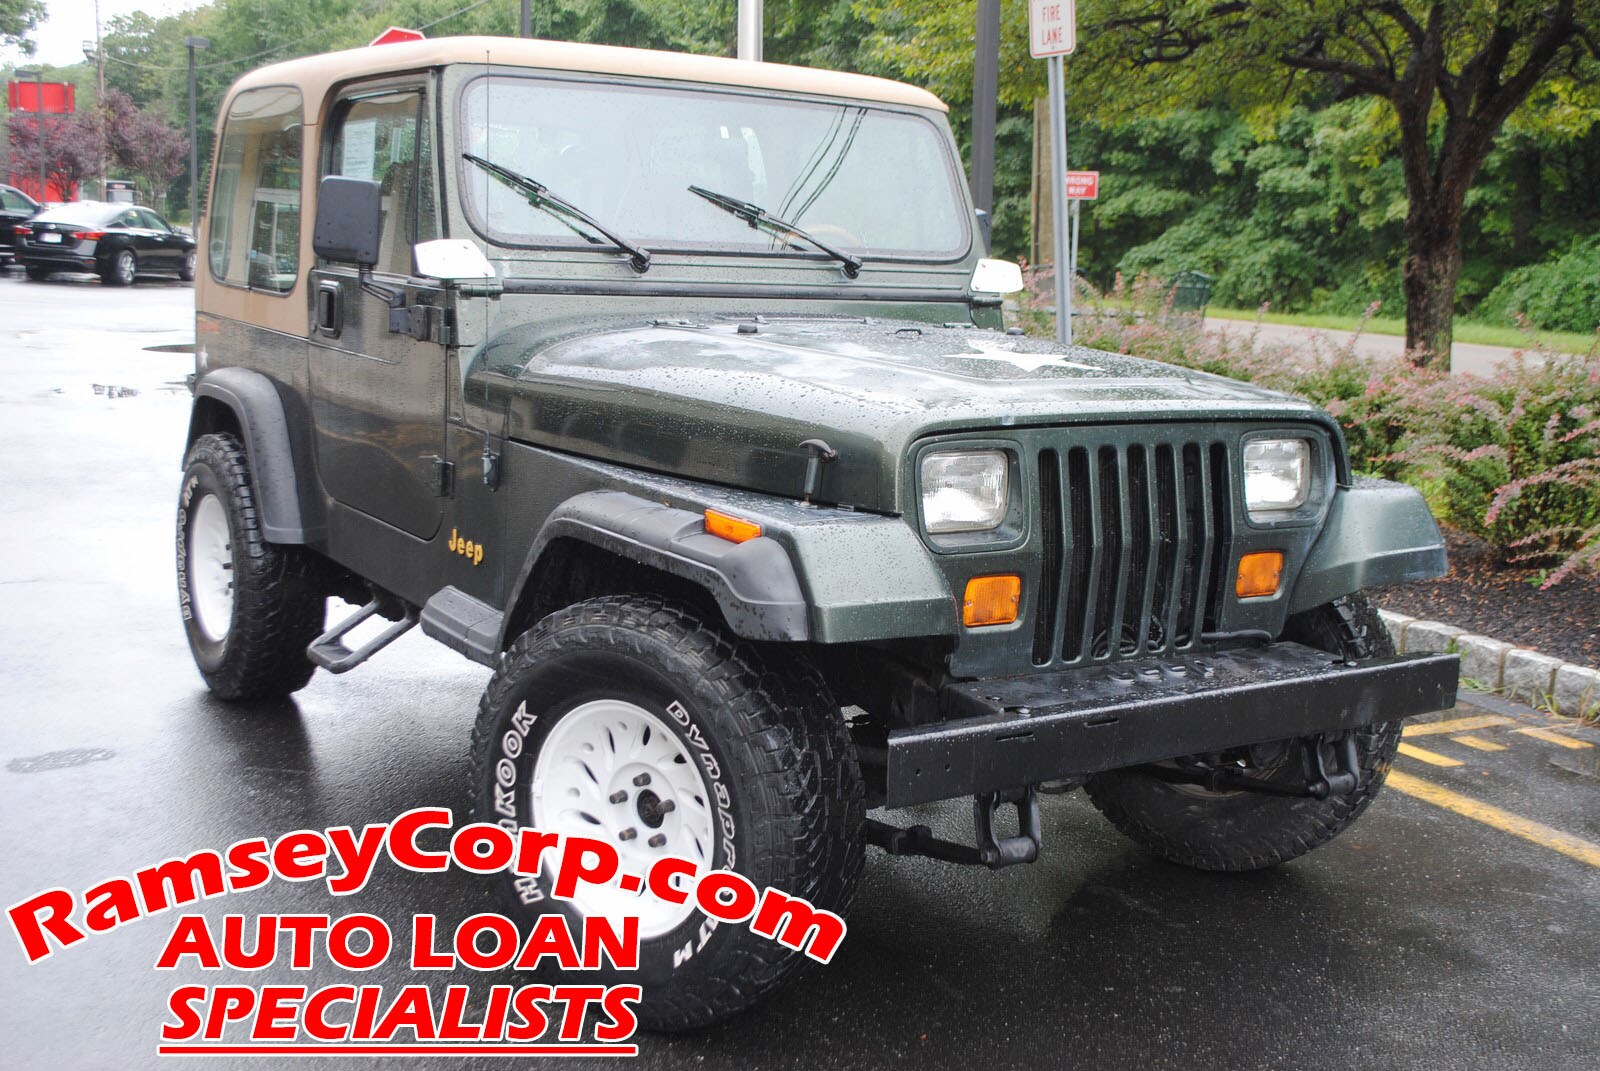 Used 1995 Jeep Wrangler For Sale at Ramsey Corp. | VIN: 1J4FY19P1SP301681